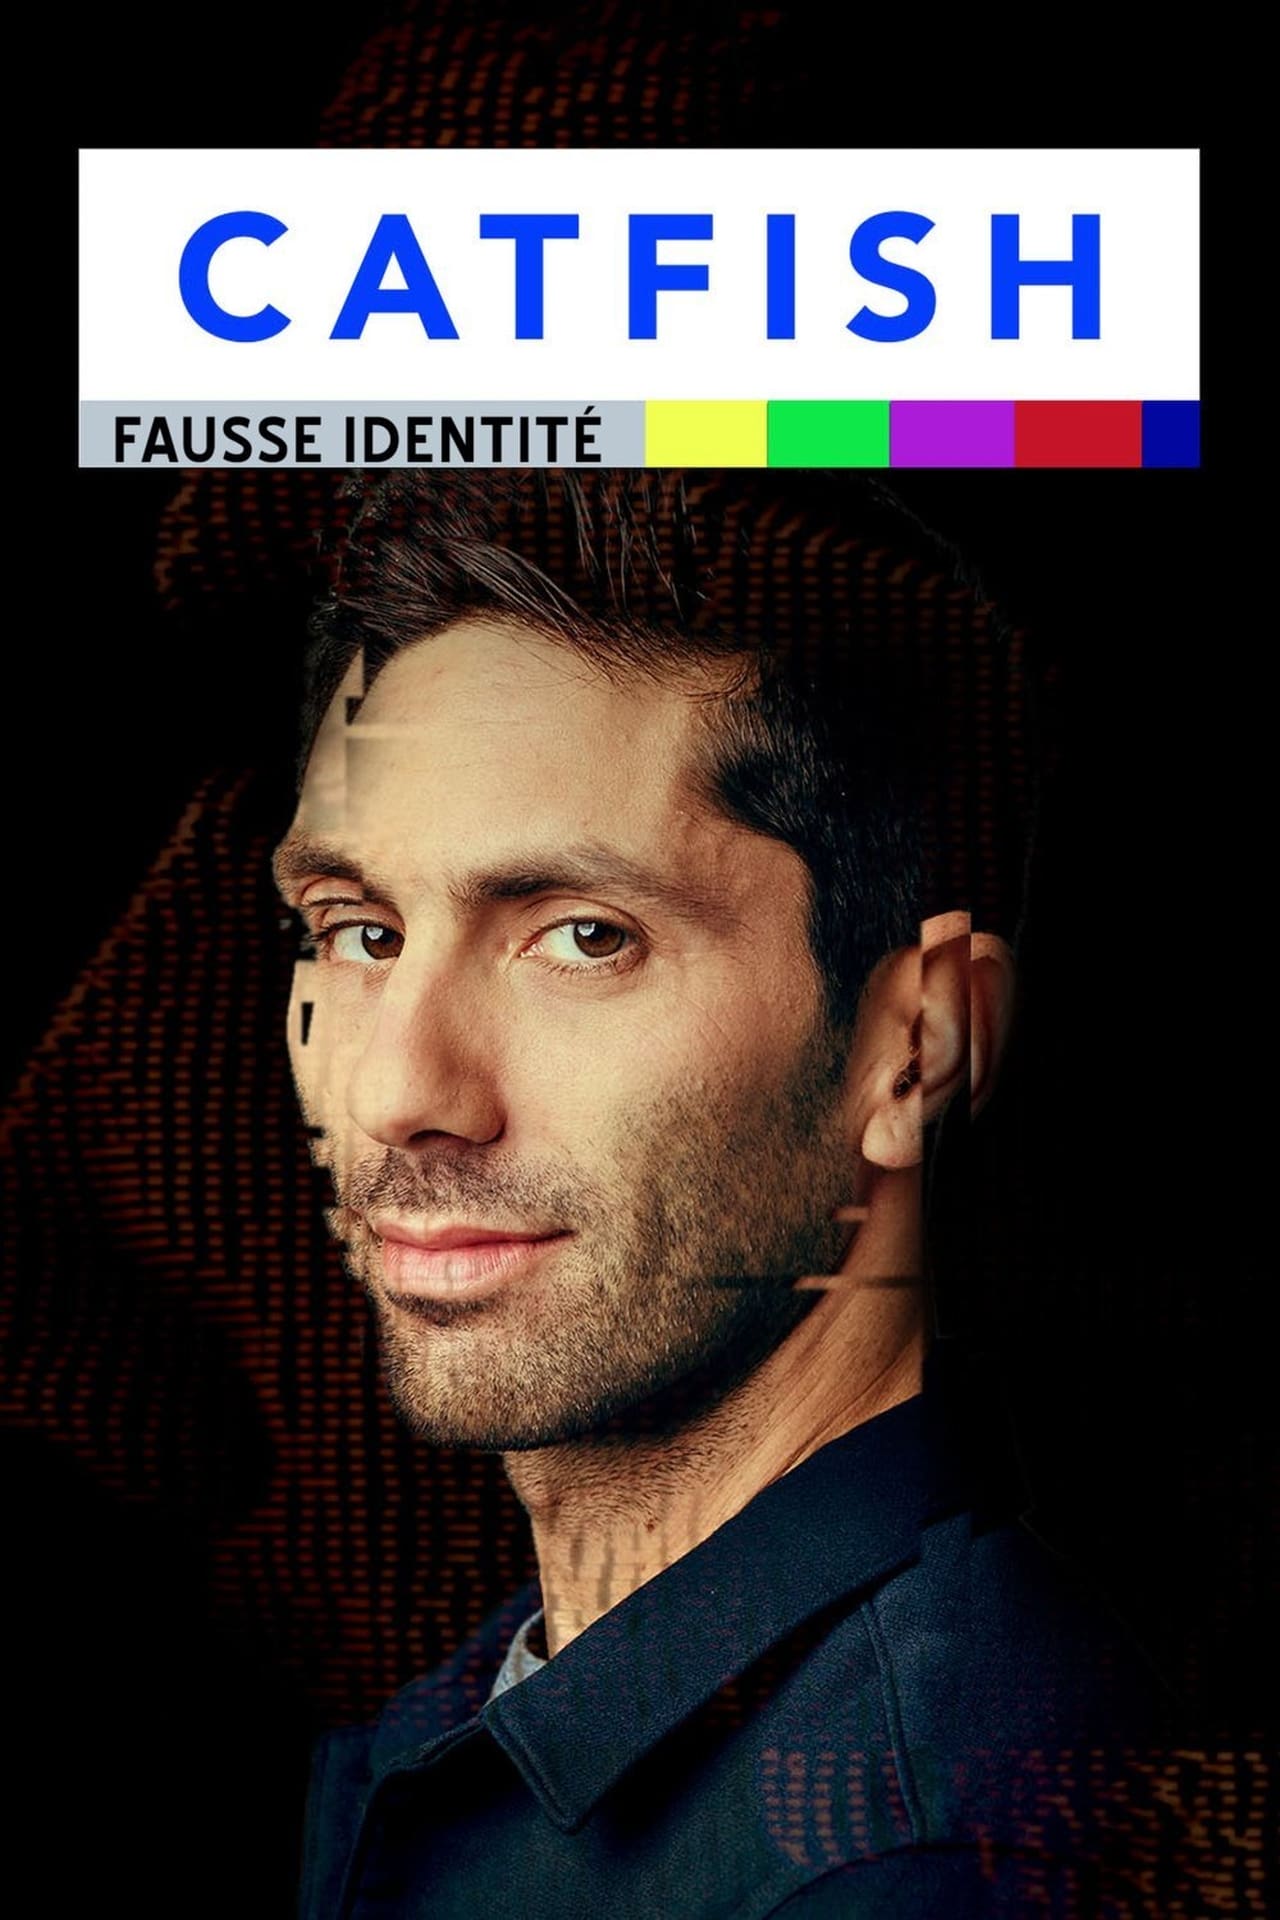 Catfish The TV Show, Season 1 release date, trailers, cast, synopsis